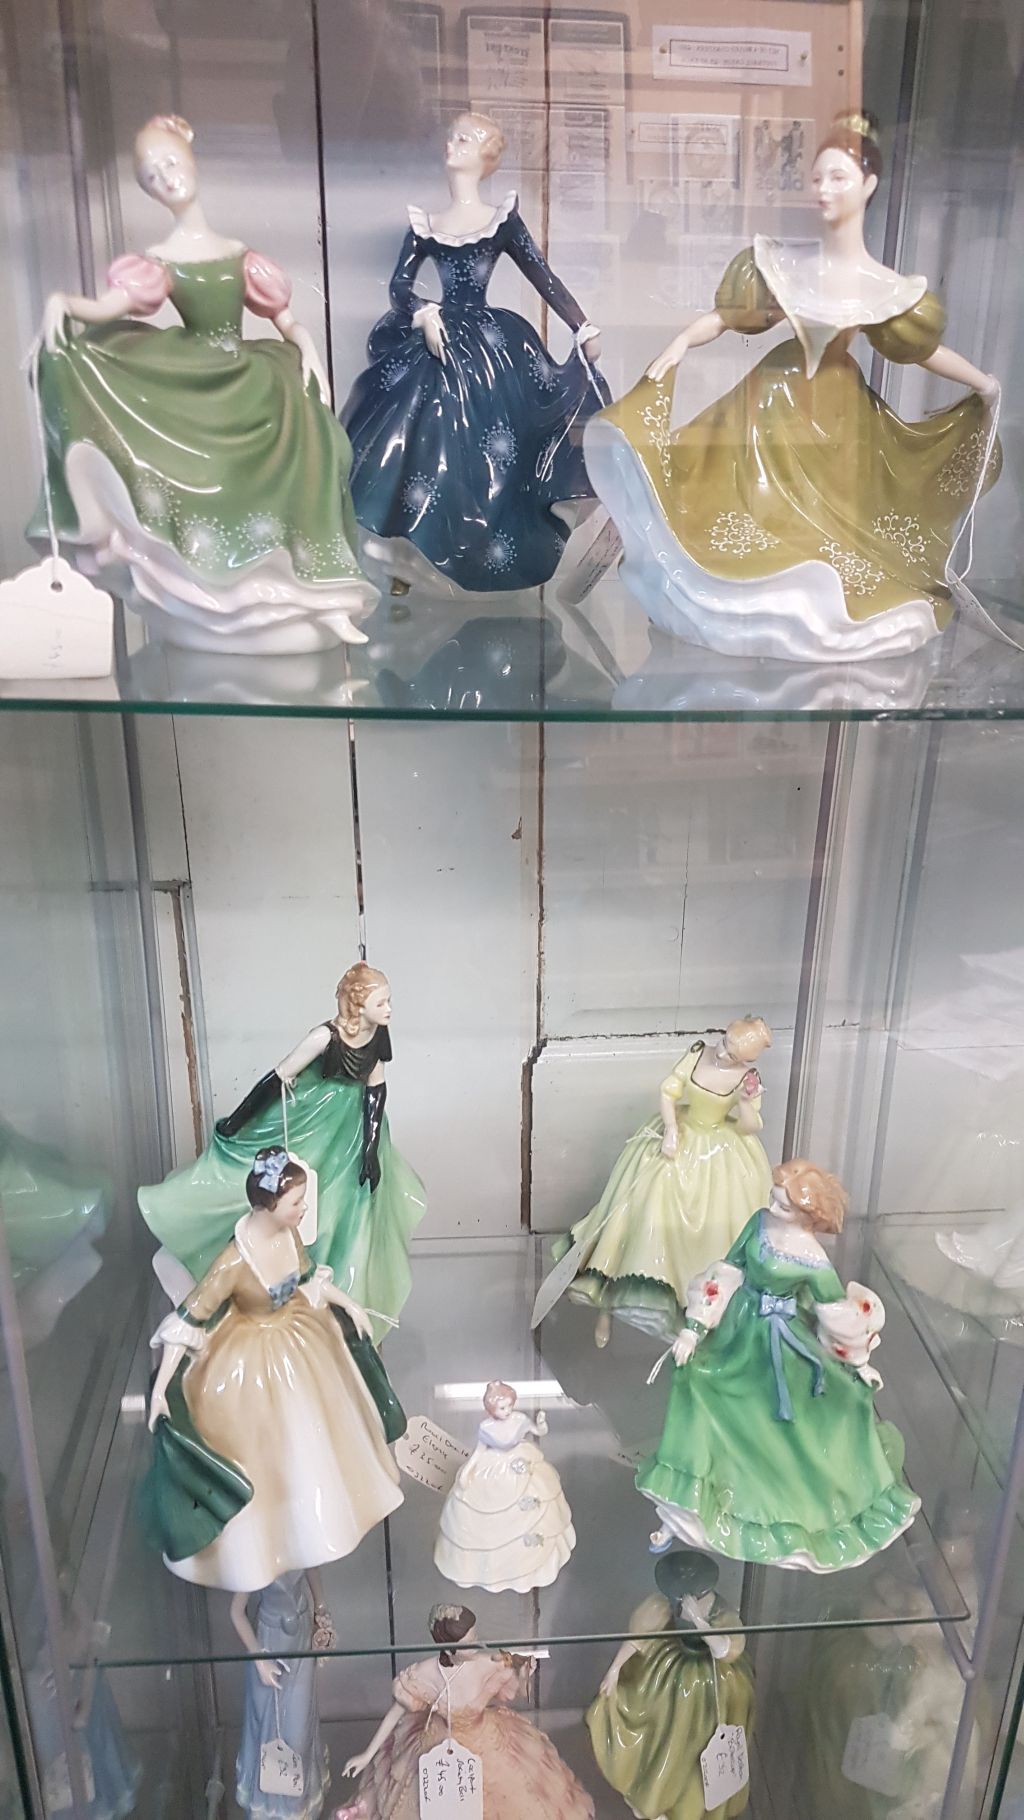 Large Selection of Figurines